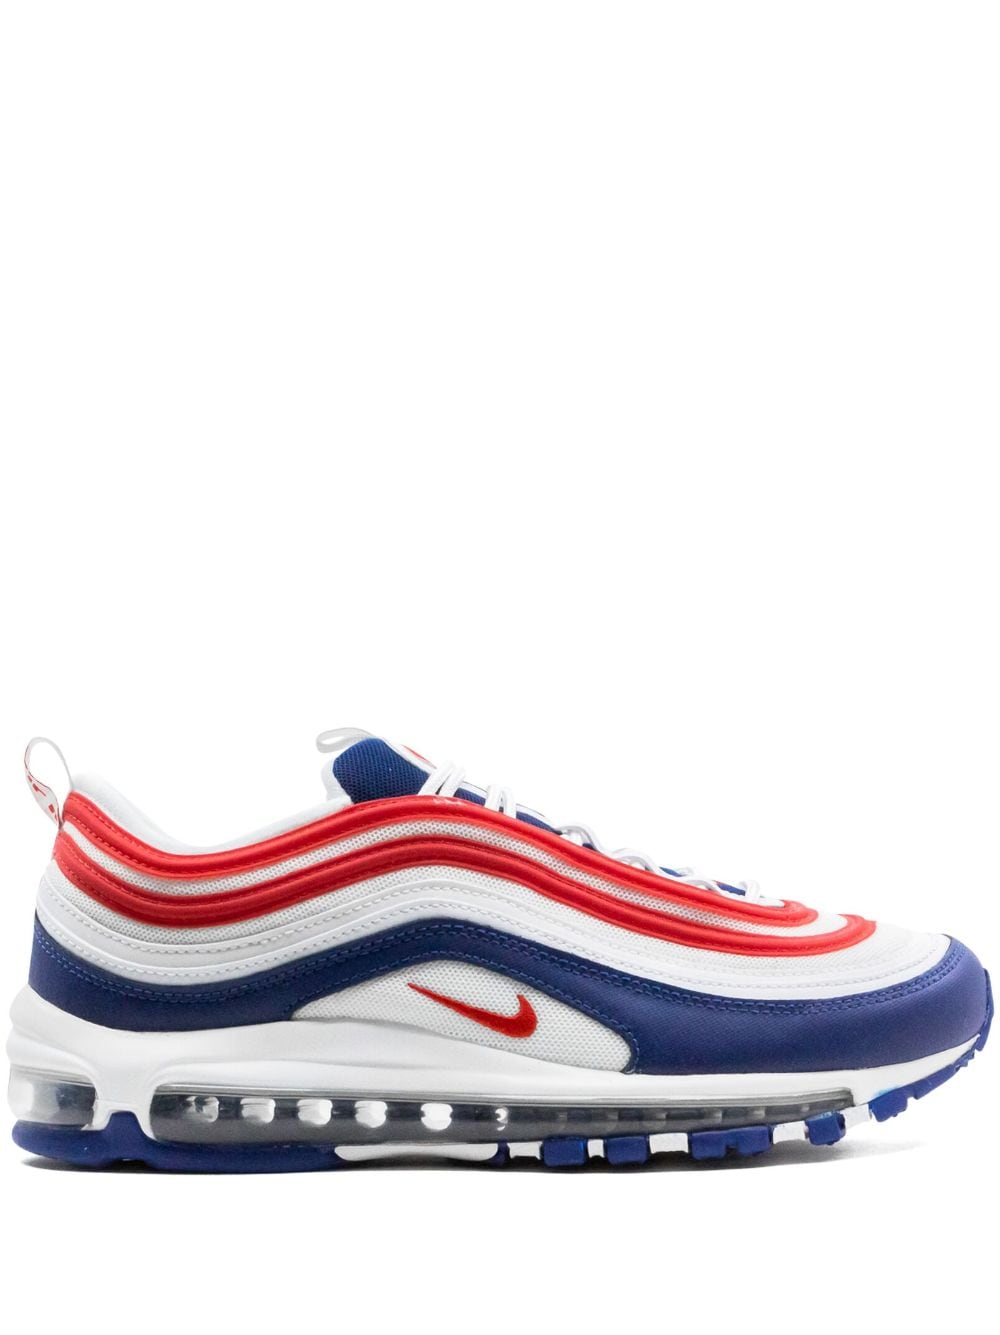 Nike Air Max 97 "USA" sneakers - Red von Nike